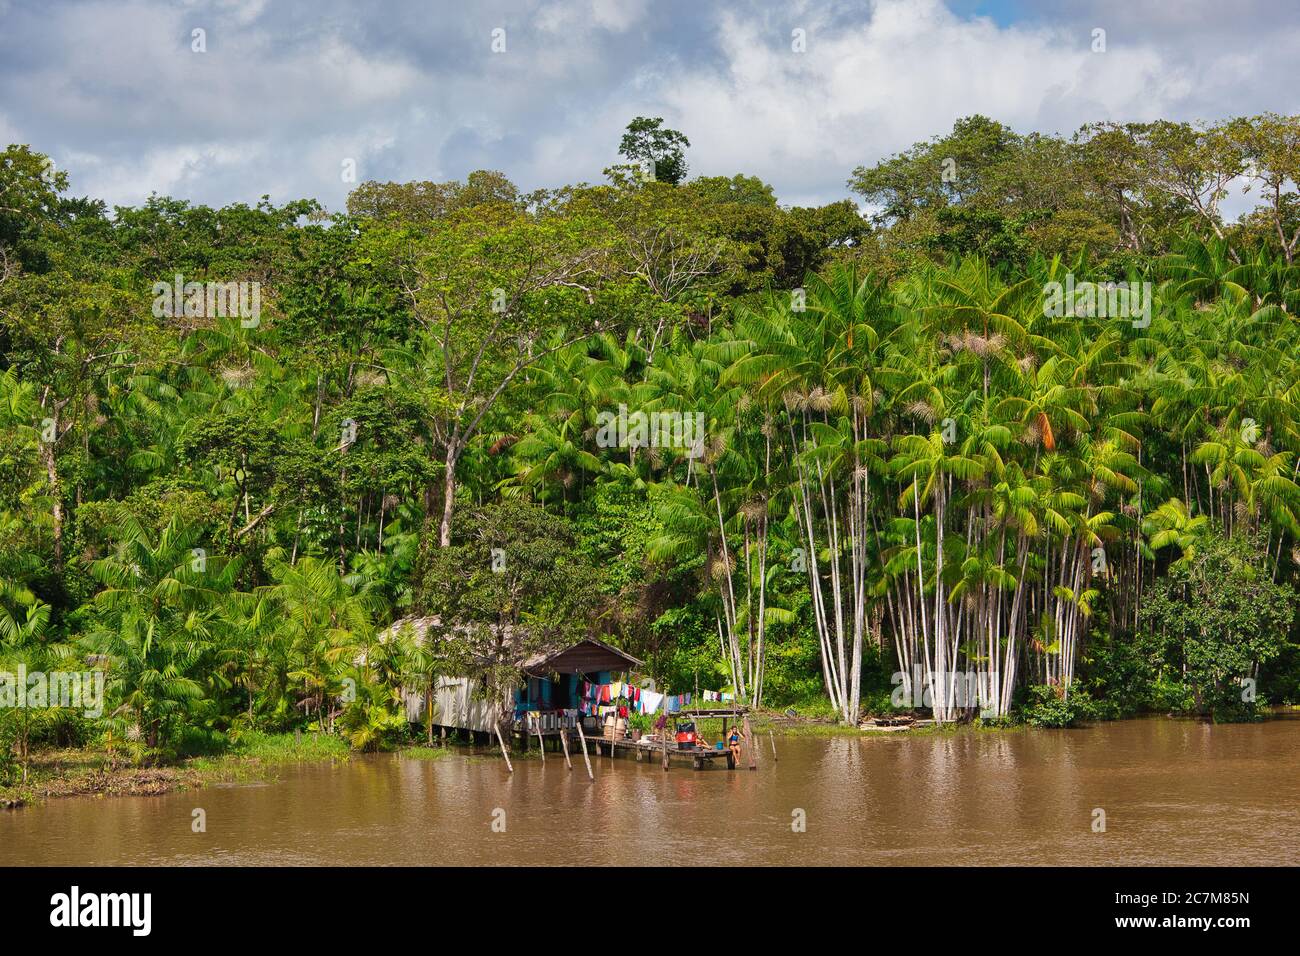 The River Amazon and houses on stilts on the river bank, a traditional Brazilian way to live near the river. Near Belem, Para State, Brazil. Stock Photo